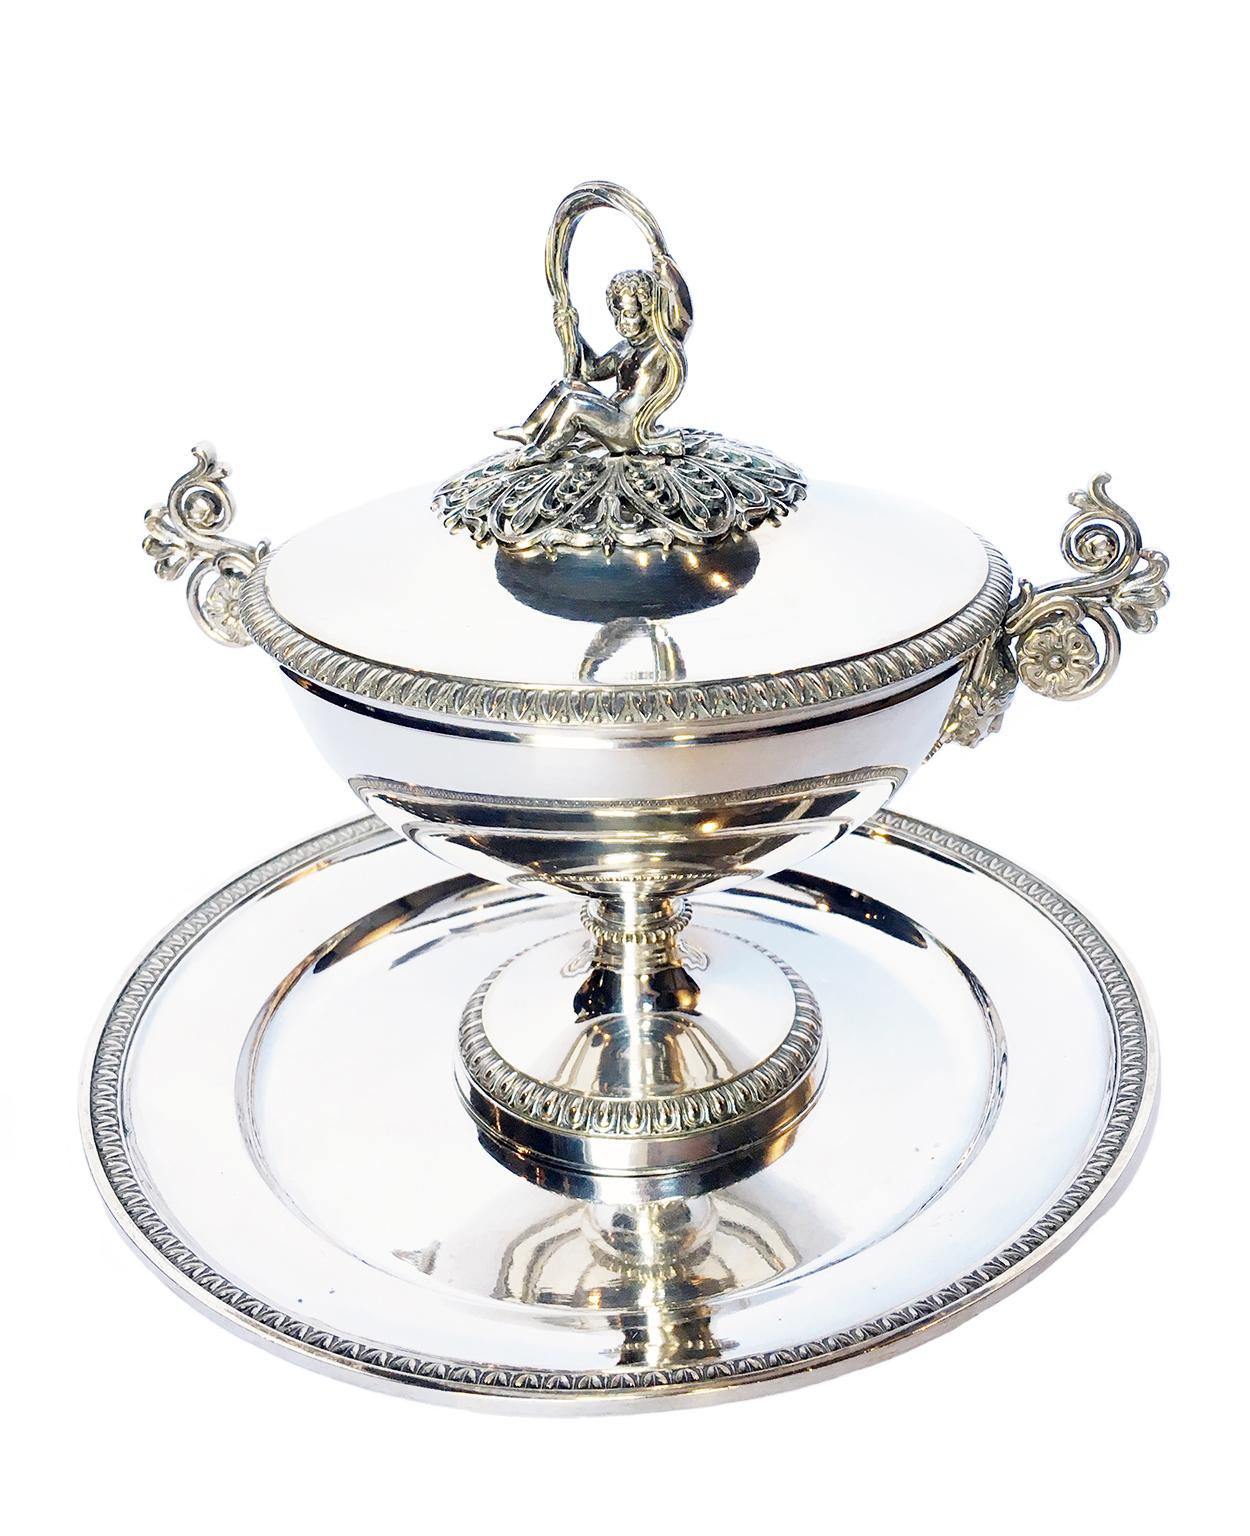 Silversmith L. B.
Small silver soup tureen or puerperal cup with plate and lid
Milan, around 1830
Height 19.5 cm (7.67 in) - diameter 21.7 cm (8.54 in)
lb 2.14 (kg 0.97)
State of conservation: slight use defects and a dent on the plate.

From about